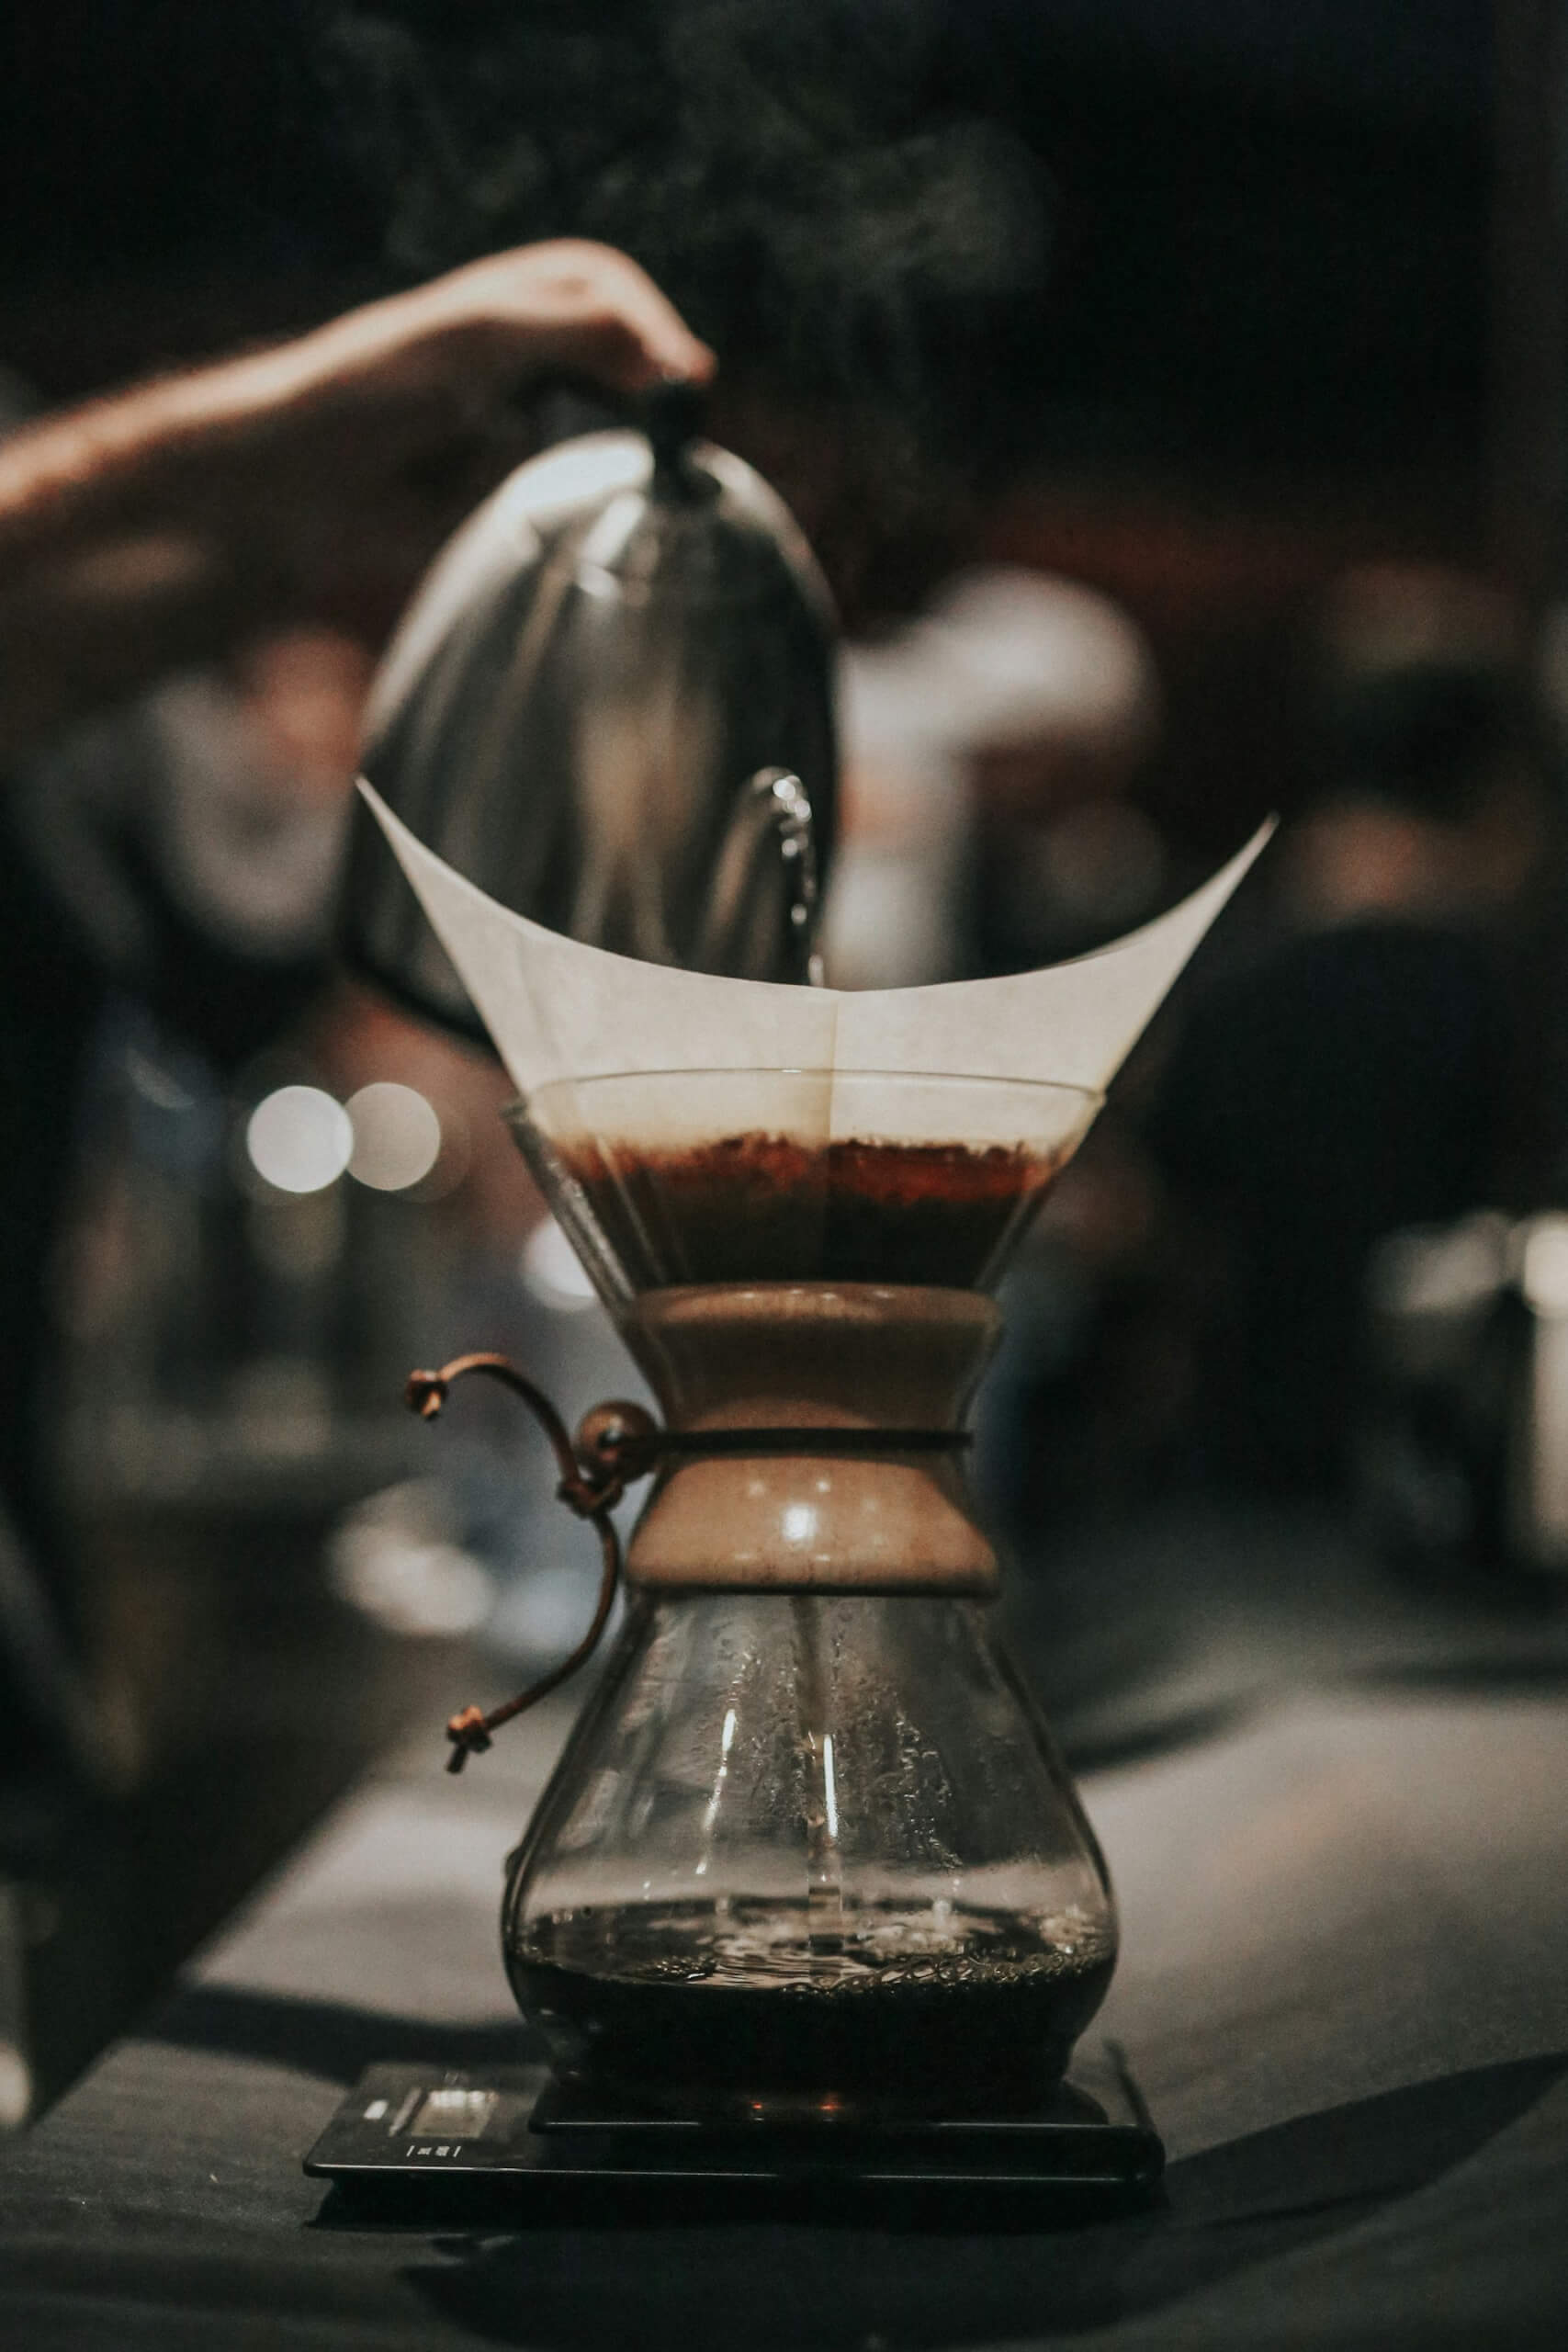 Understanding Coffee Extraction. Photo by <a href="https://unsplash.com/@nixcreative?utm_content=creditCopyText&amp;utm_medium=referral&amp;utm_source=unsplash">Tyler Nix</a> on <a href="https://unsplash.com/photos/shallow-focus-photography-of-black-and-brown-coffeemaker-jE-27l7V3NU?utm_content=creditCopyText&amp;utm_medium=referral&amp;utm_source=unsplash">Unsplash</a>